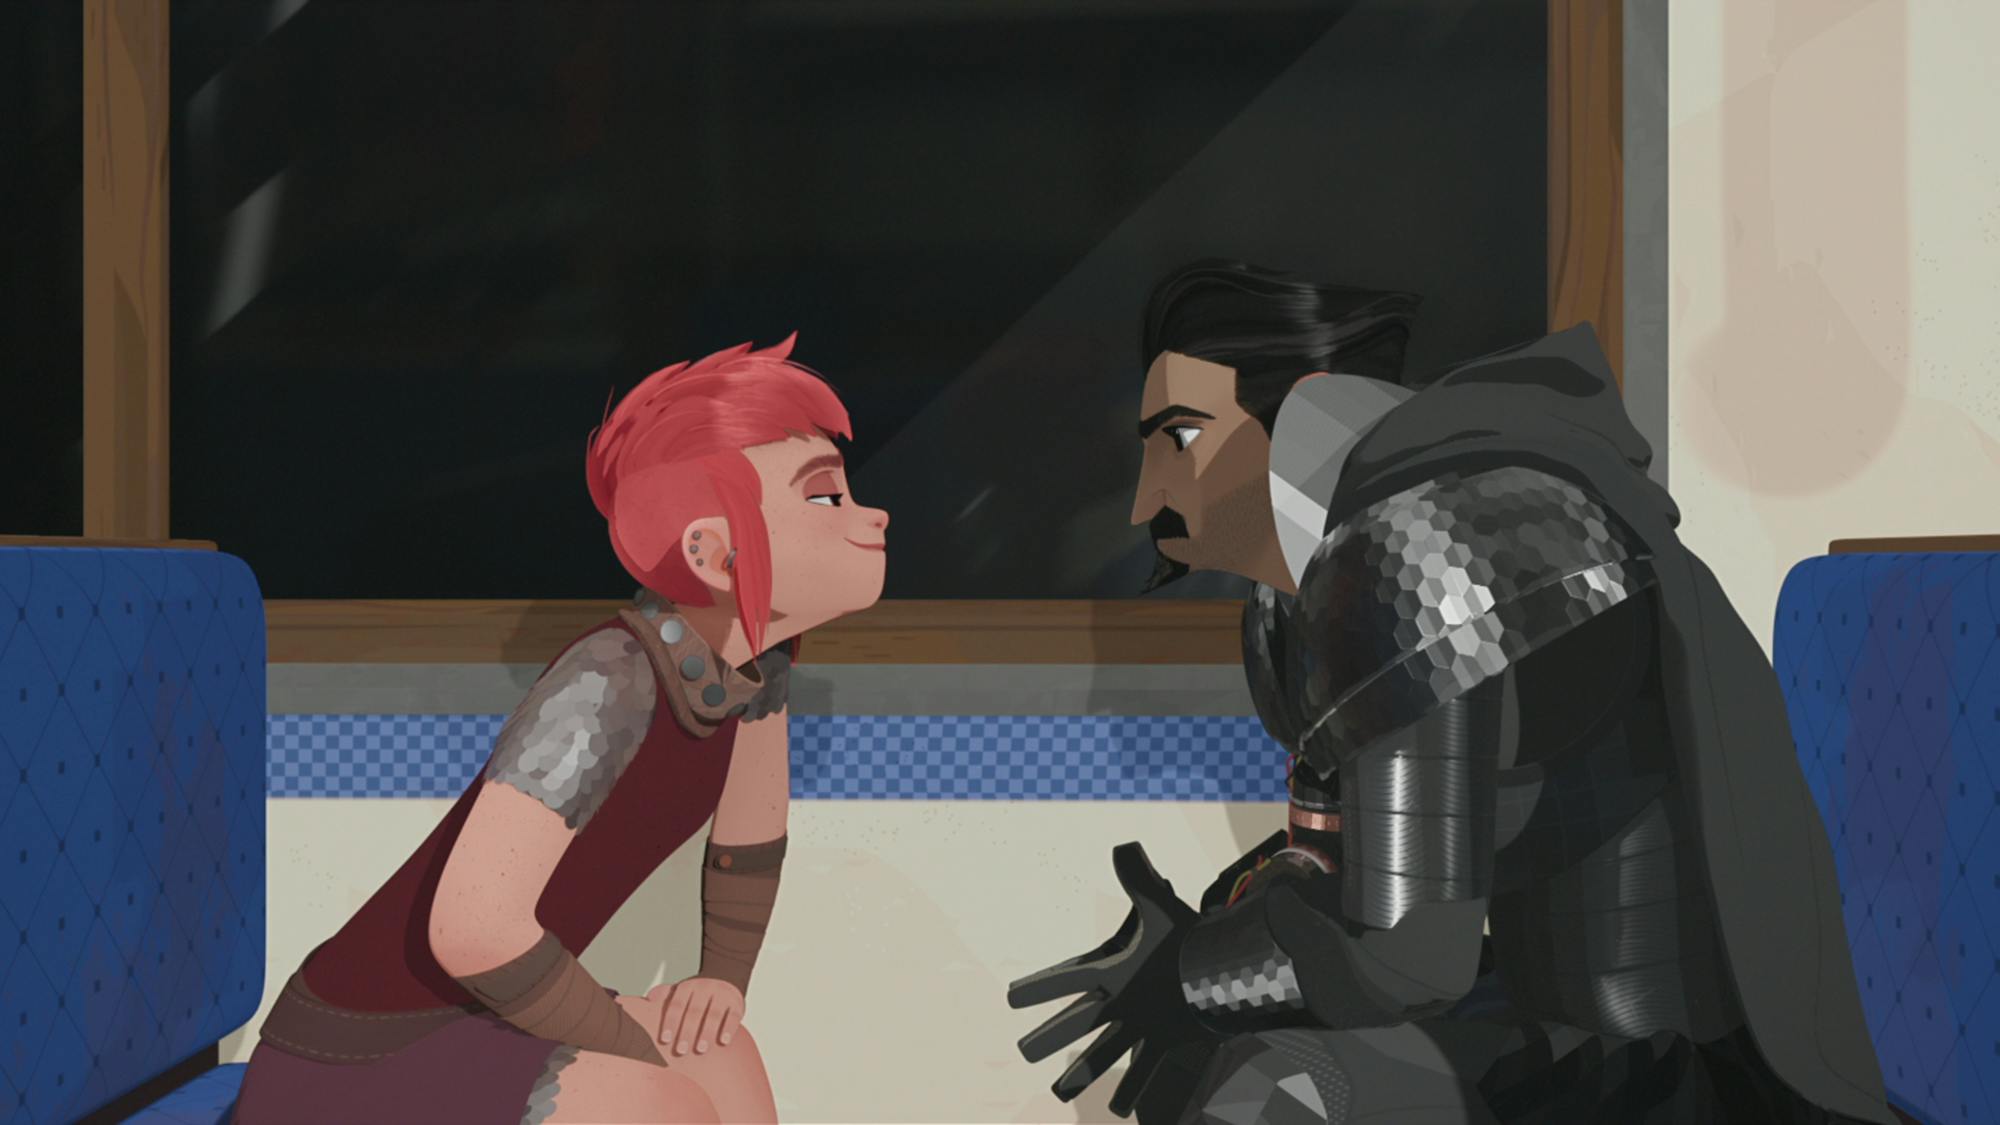 Nimona (Chloë Grace Moretz) and Ballister Boldheart (Riz Ahmed) sit on blue chairs and face each other talking with urgency.